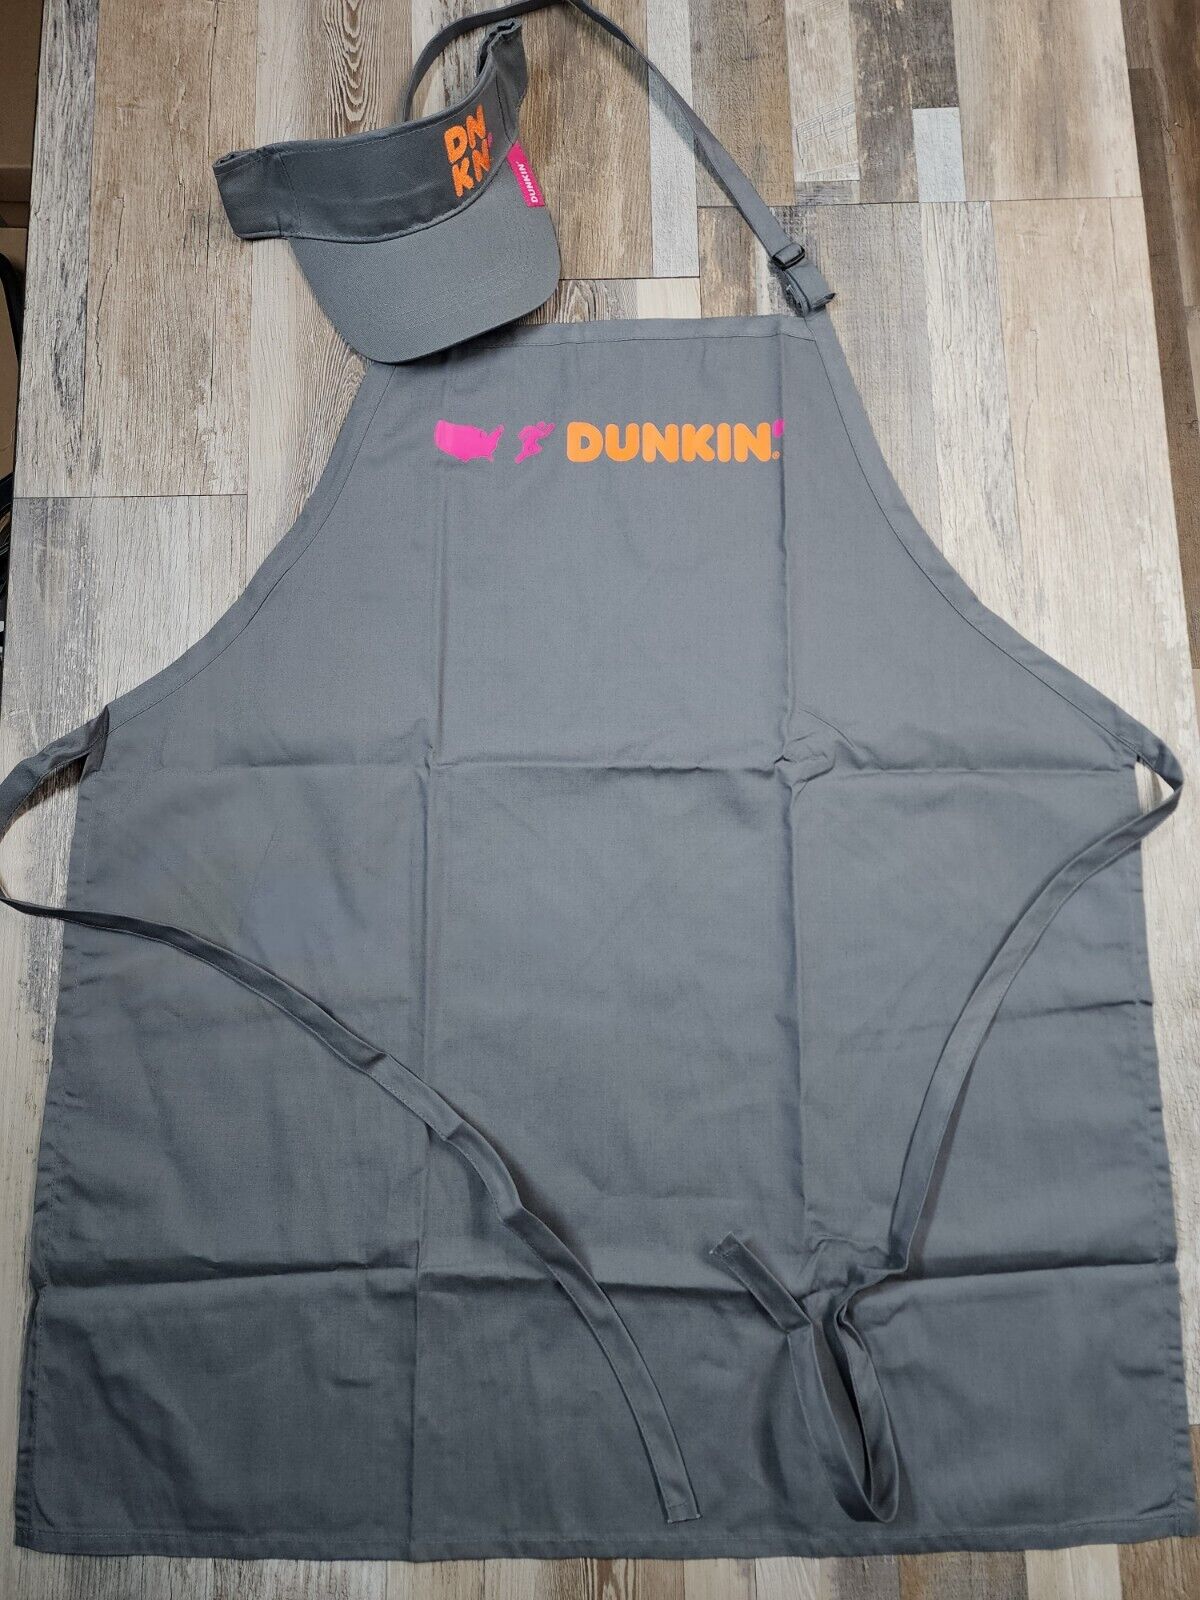 New Set Official DUNKIN DONUTS Uniform Apron Adult S/M + Adult Visor In GRAY